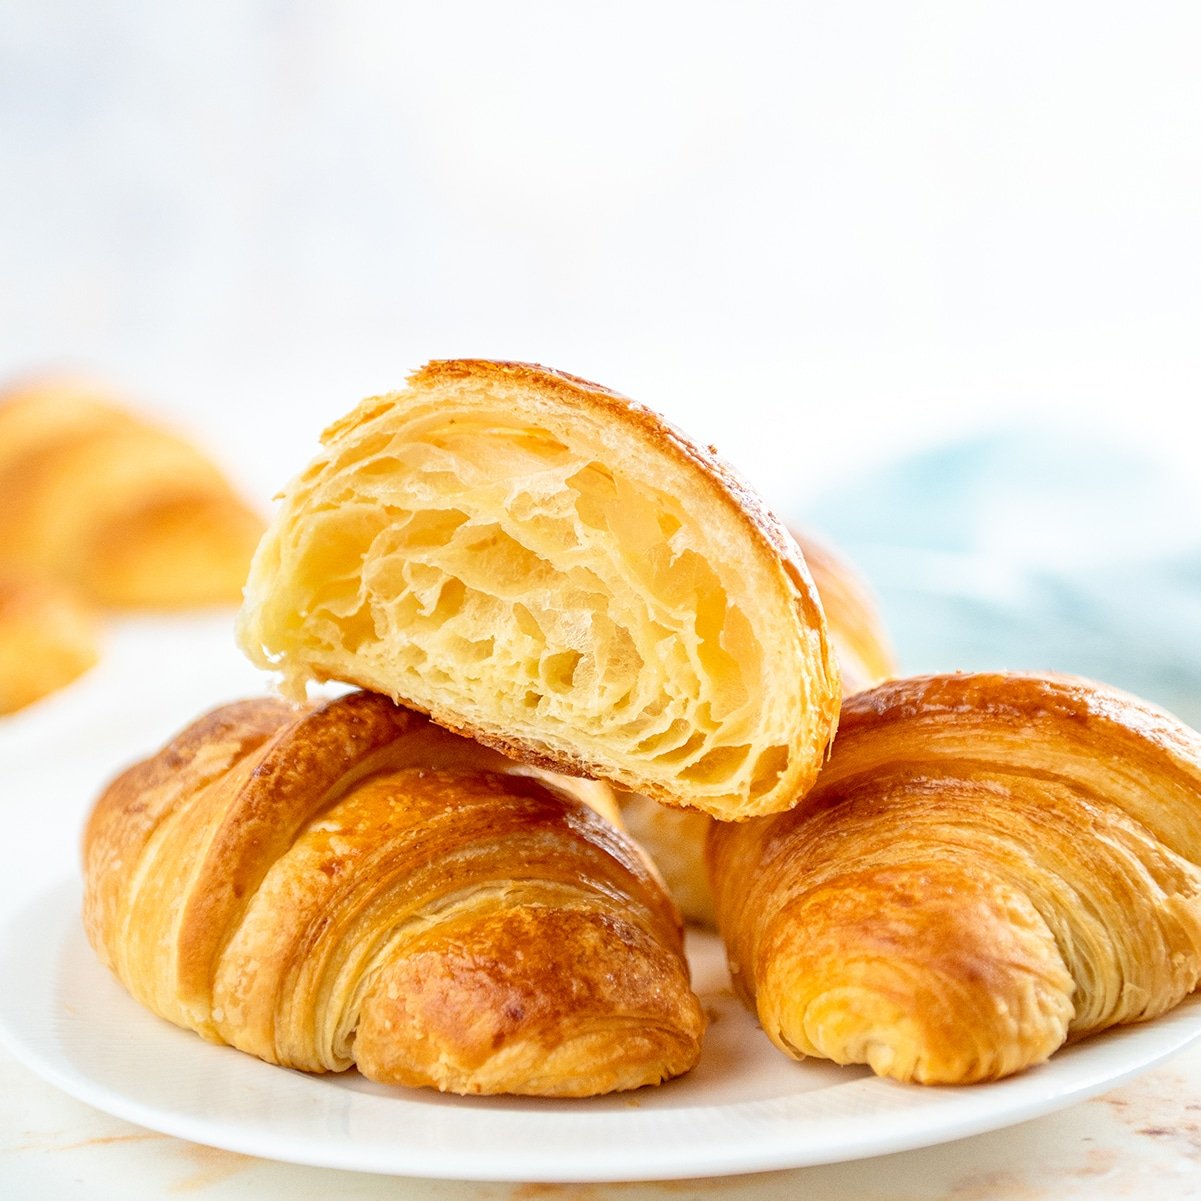 half open croissant laying on top of two other croissants on a plate